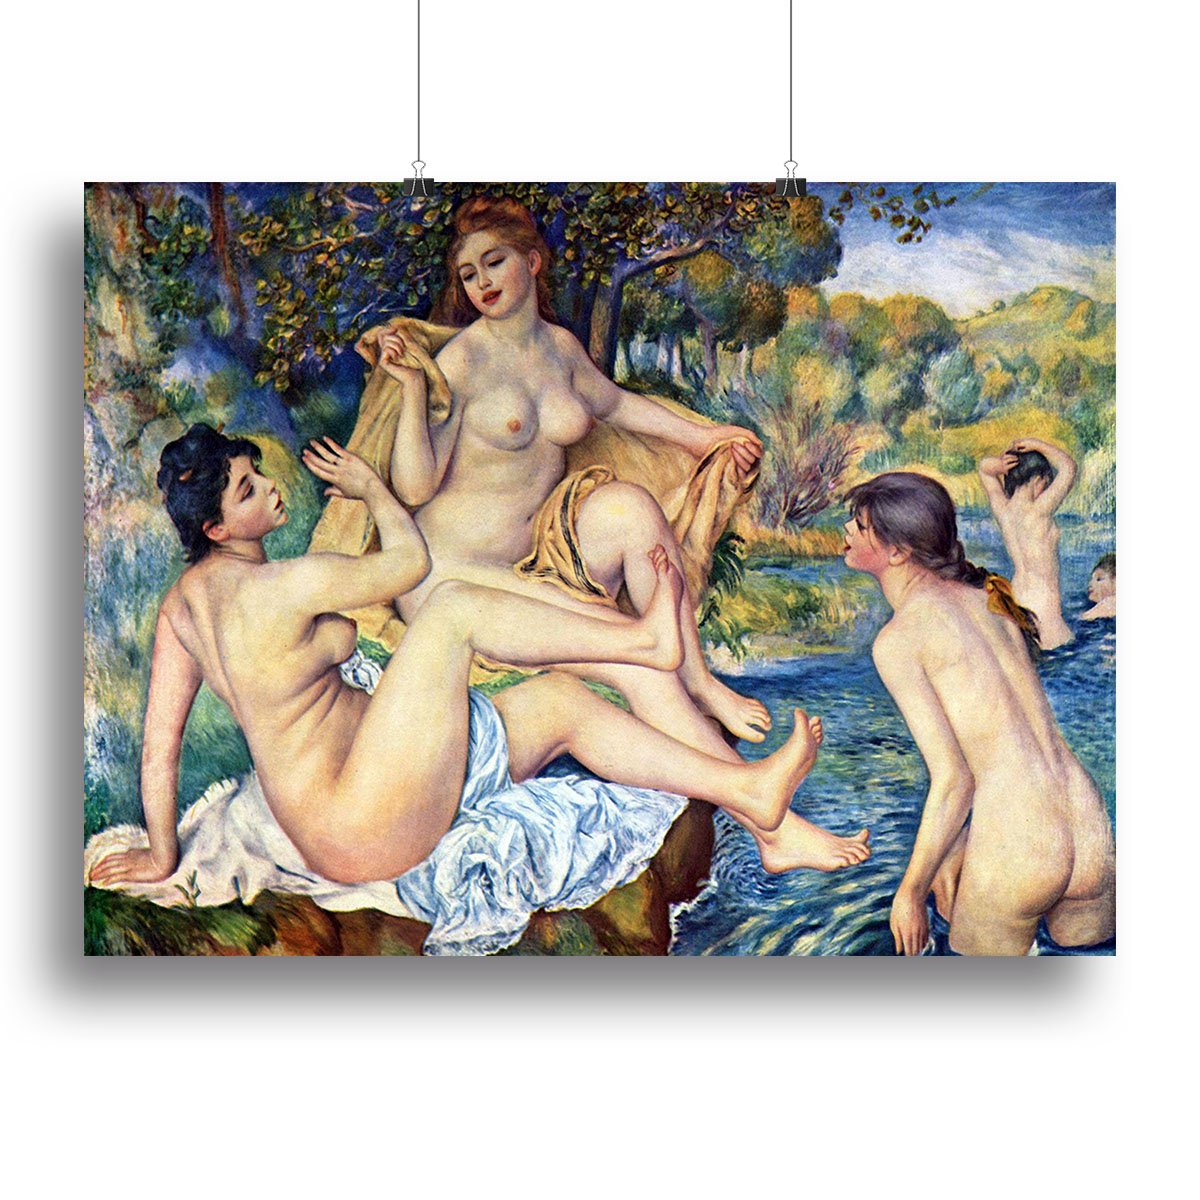 The Large Bathers by Renoir Canvas Print or Poster